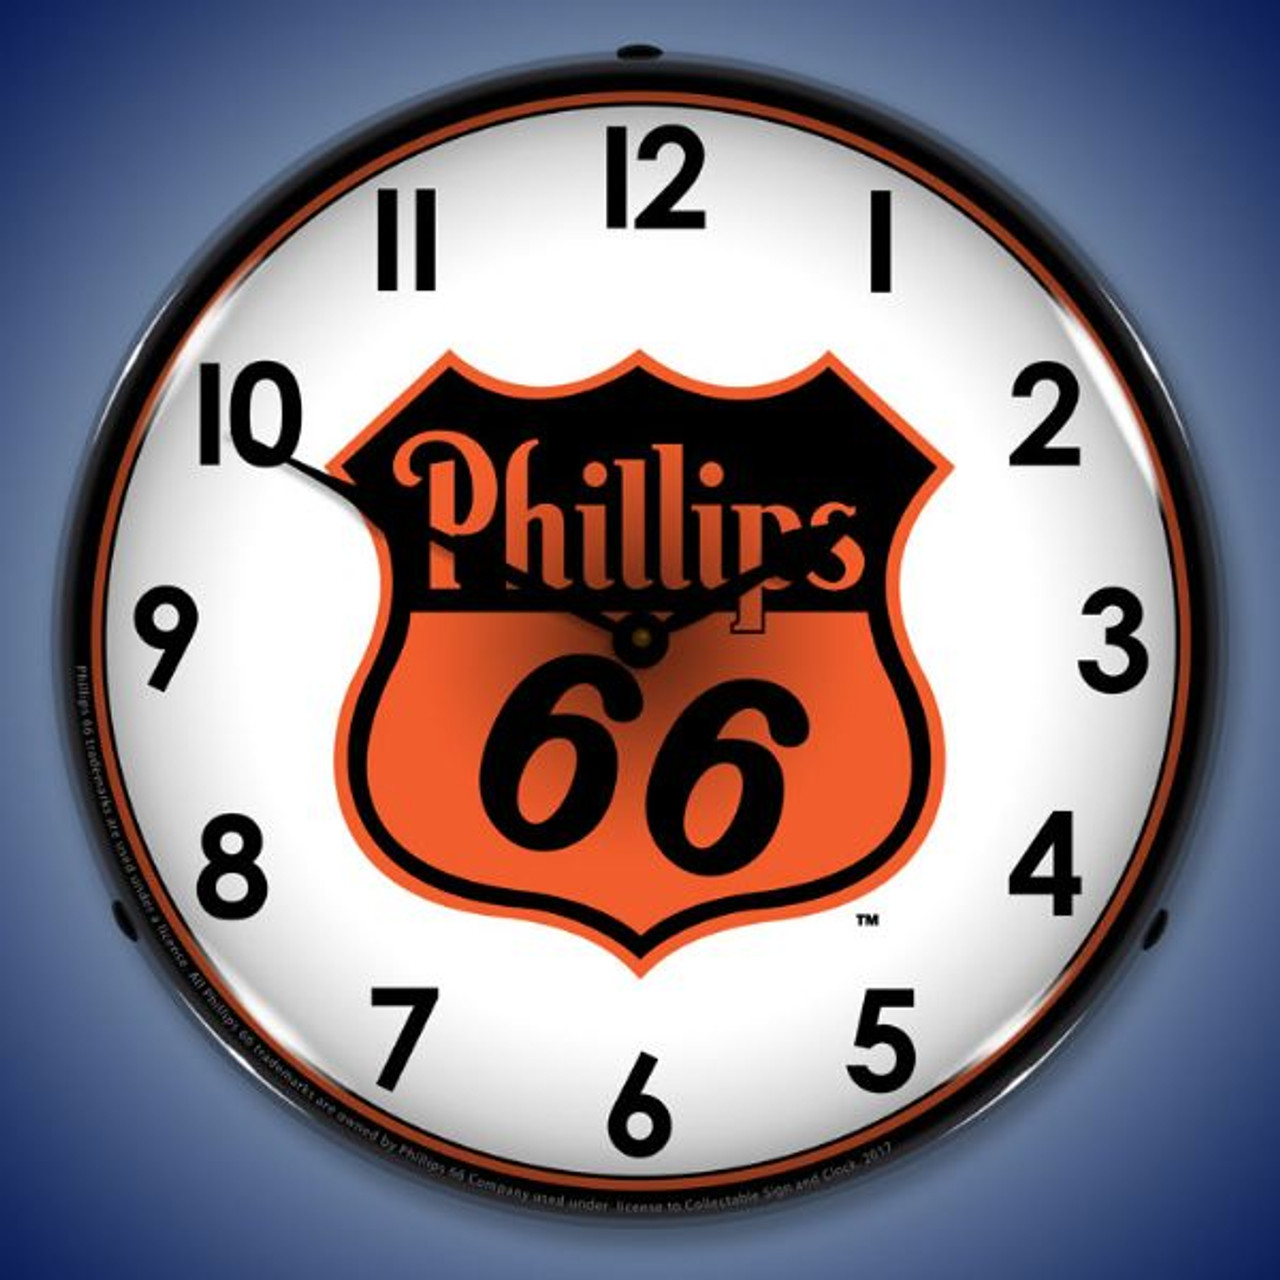 phillips 66 sign